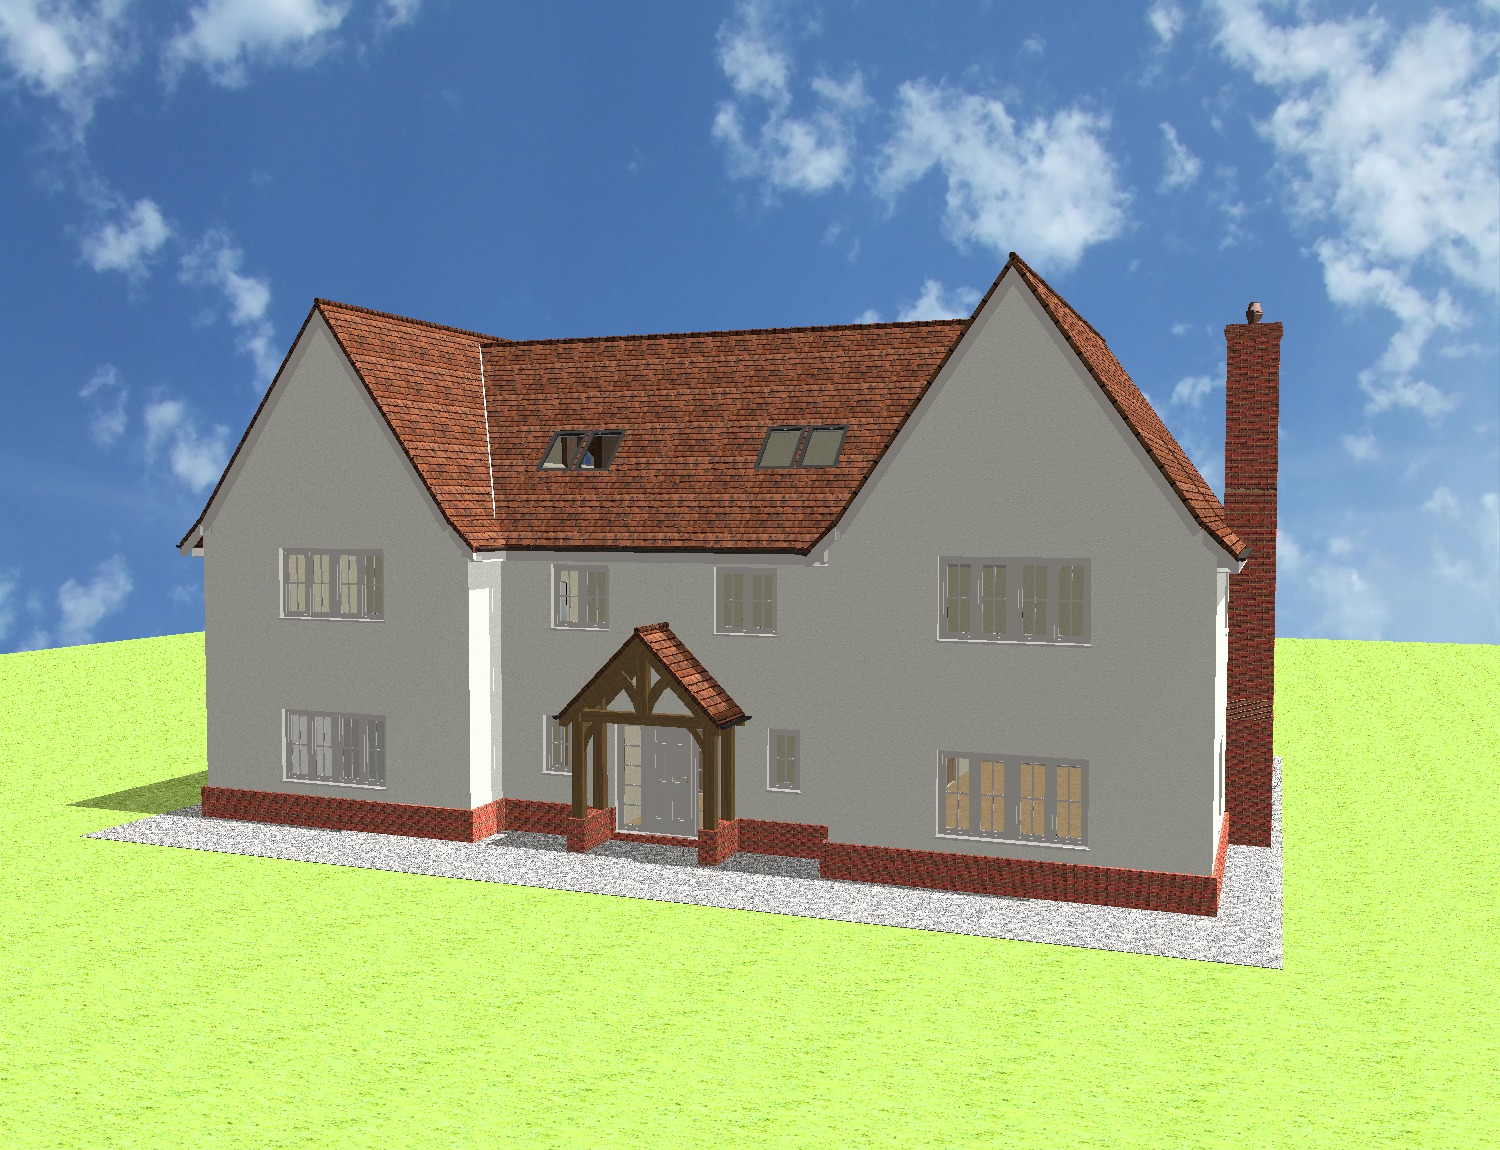 New dwelling in Southminster